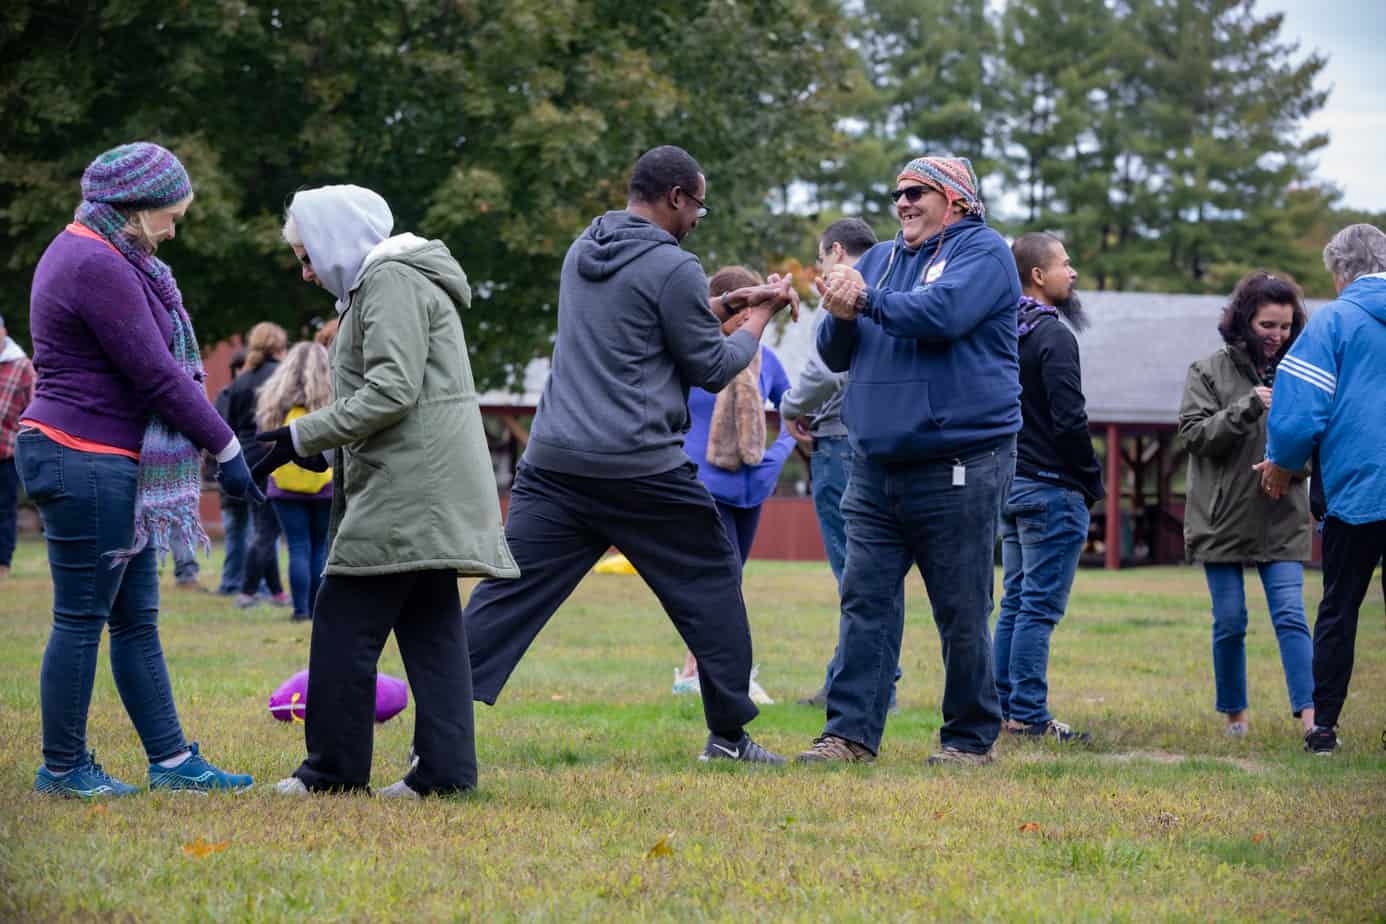 A group of people playing lawn games at the Mountainside addiction treatment center alumni reunion.